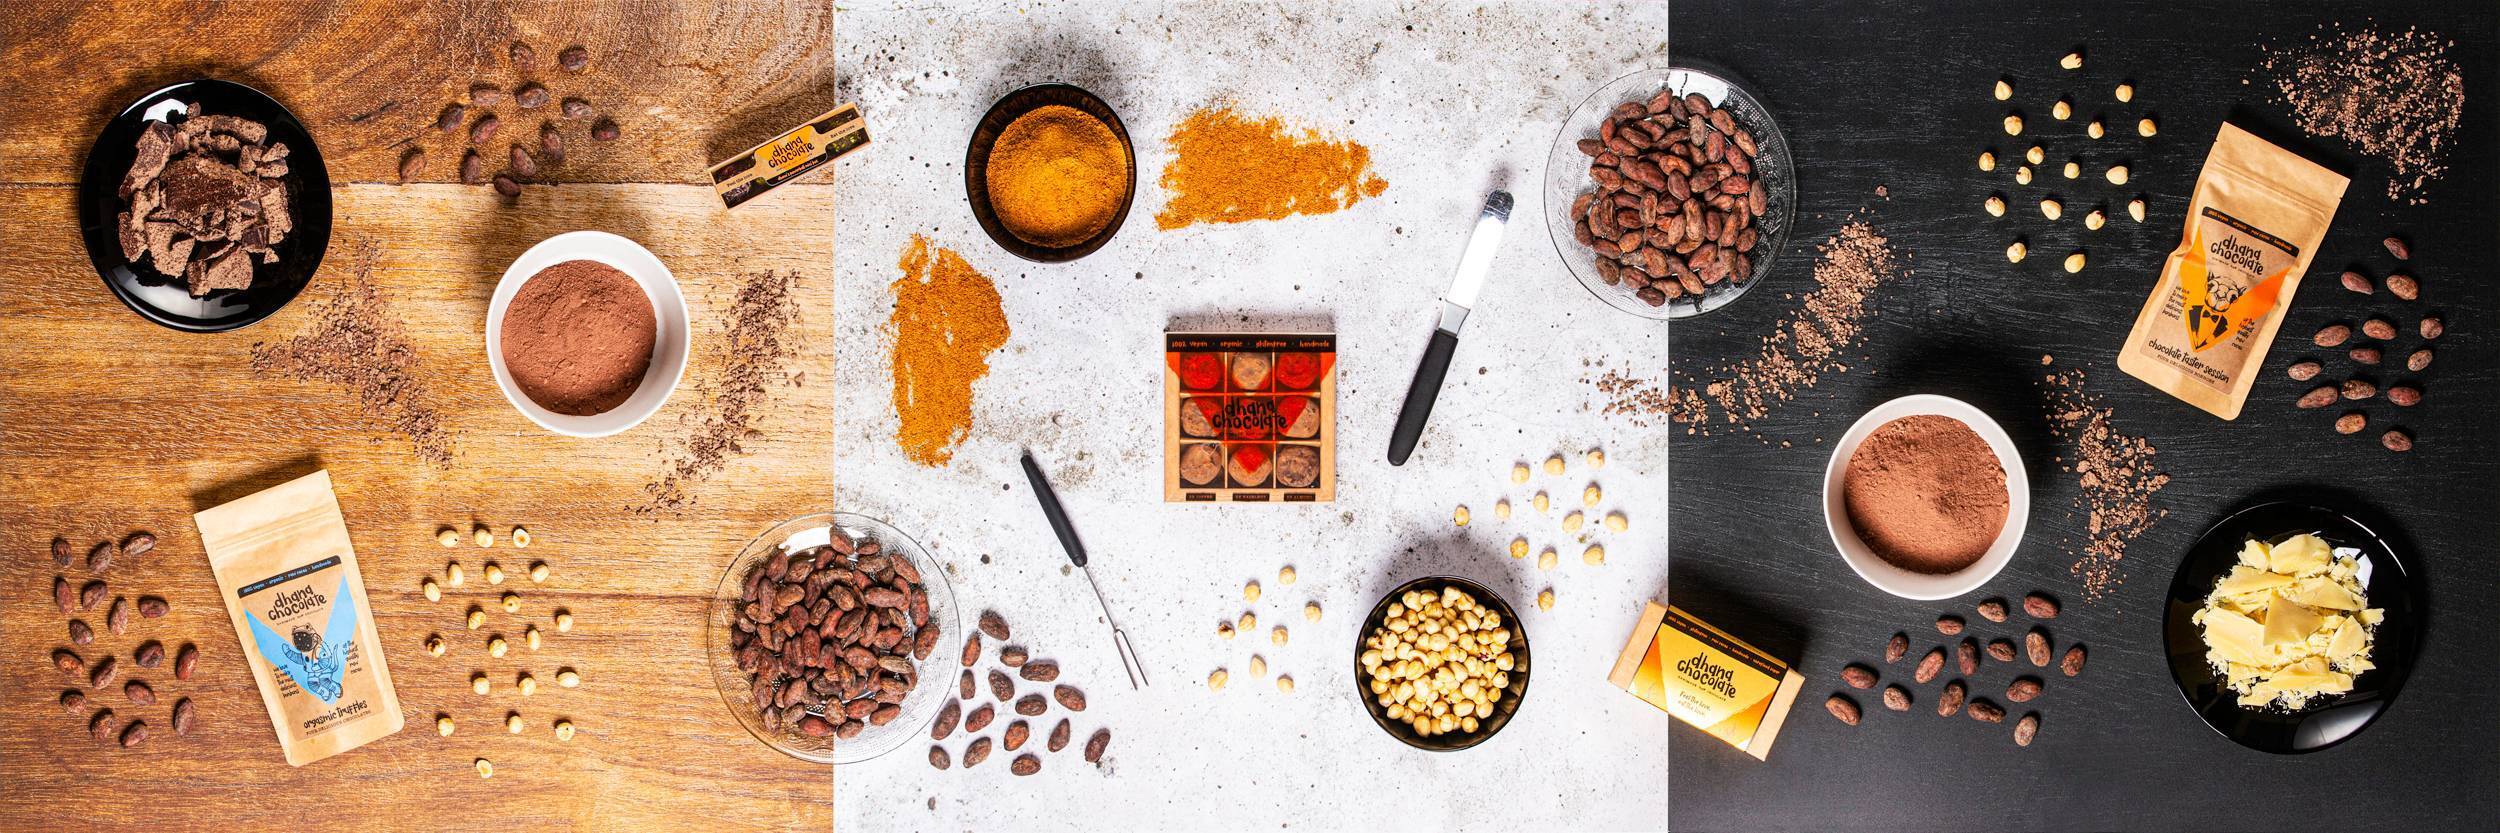 Winchester-Creatives_Fotograaf_Groningen_Productfoto_Lifestyle-Foto_Dhana_Chocolate_Producten_Assortiment_Flatlay_Chocolade_Cacao_Noten_gh10r19Pp.jpg